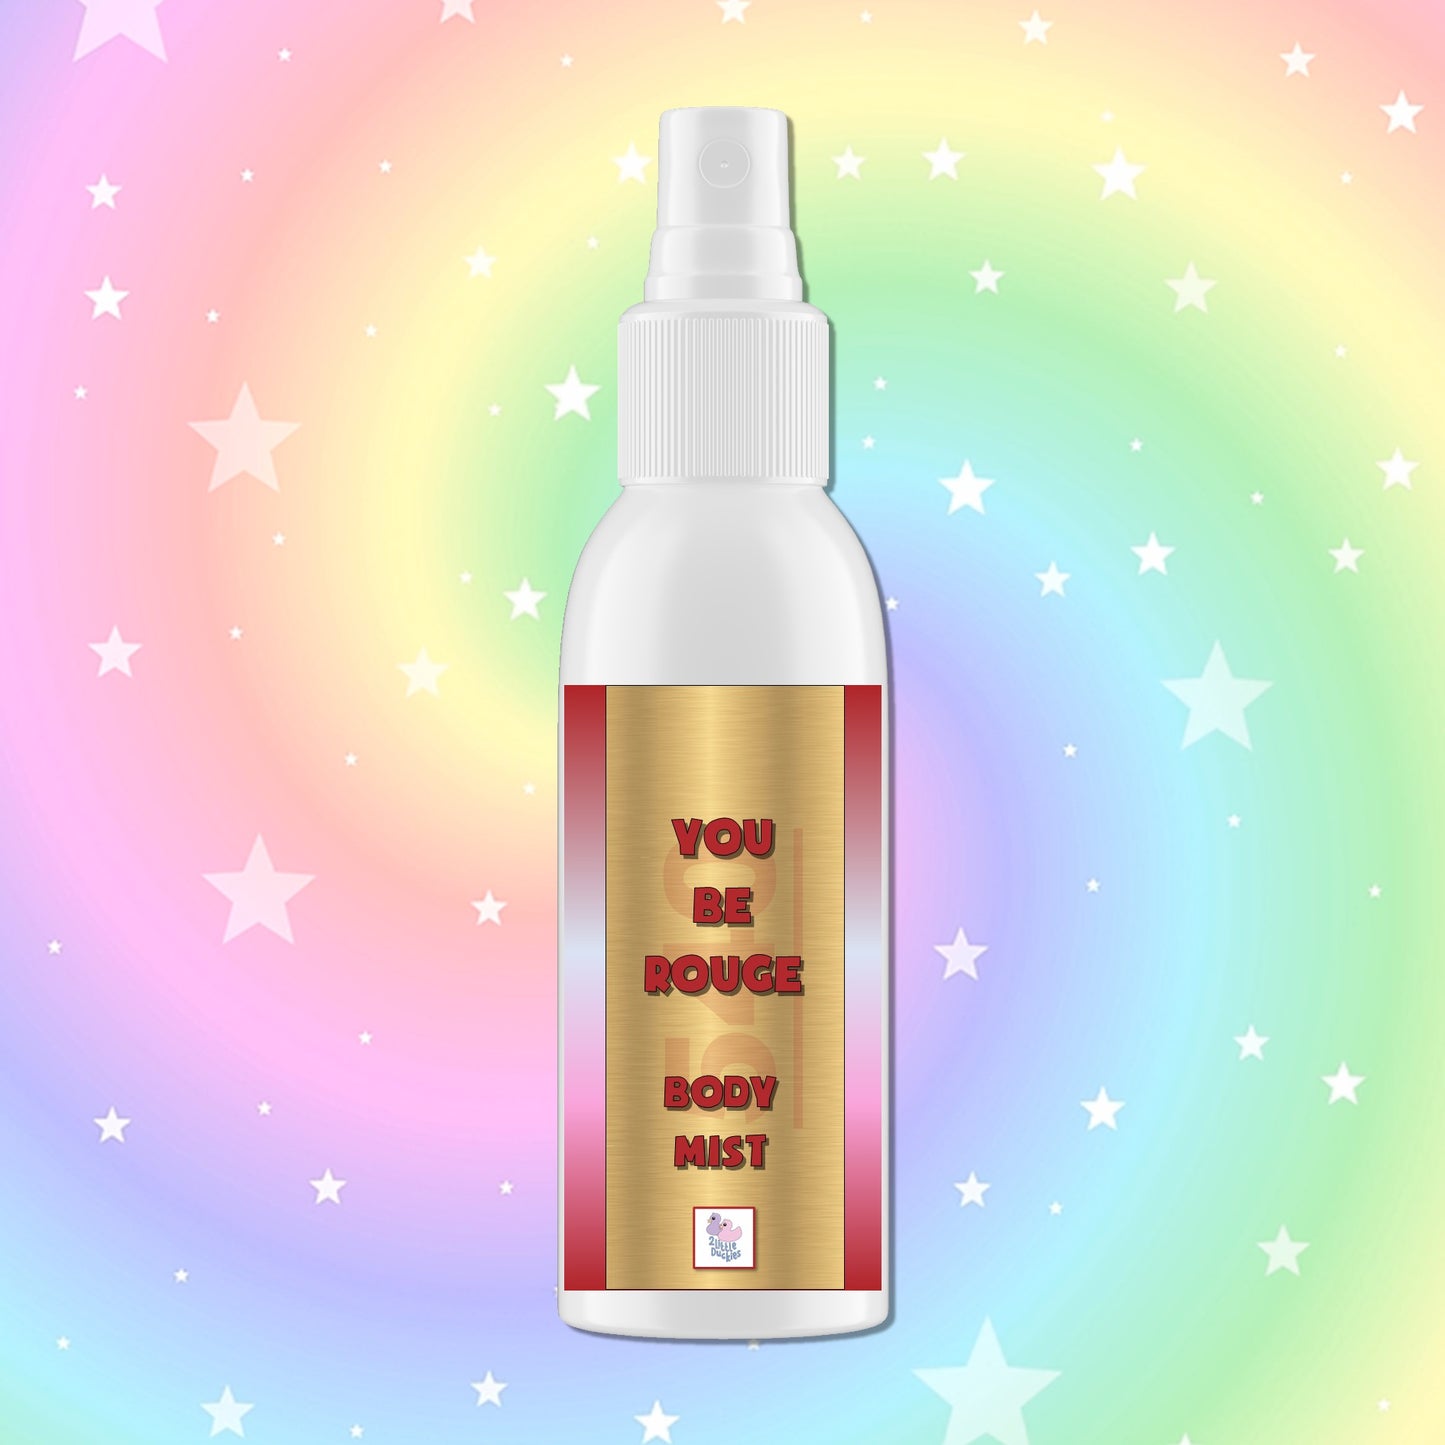 You Be Rouge Body Mist 100ml